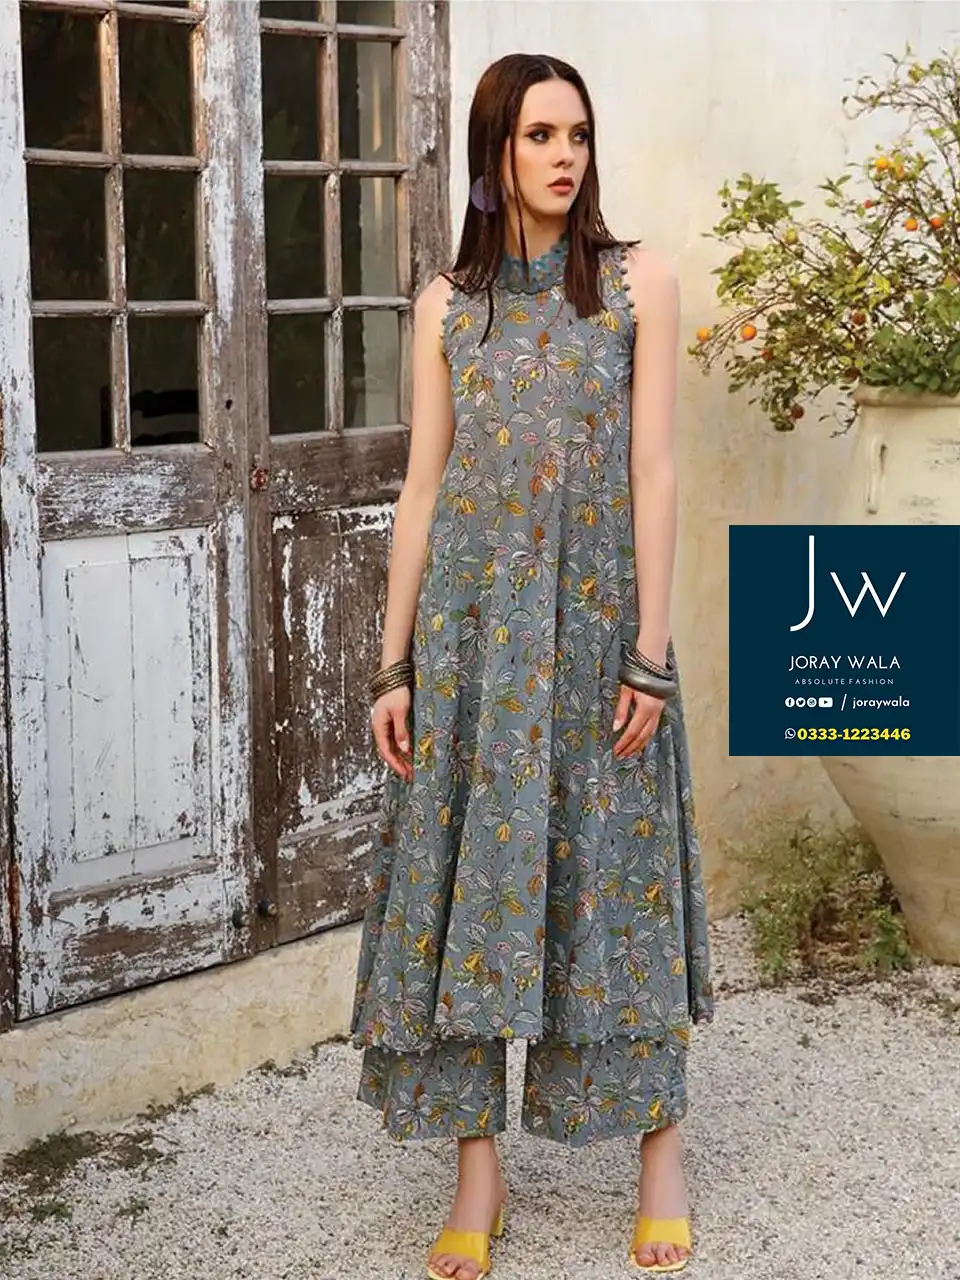 Digital Printed Swiss Lawn D25 with free delivery available at joraywala